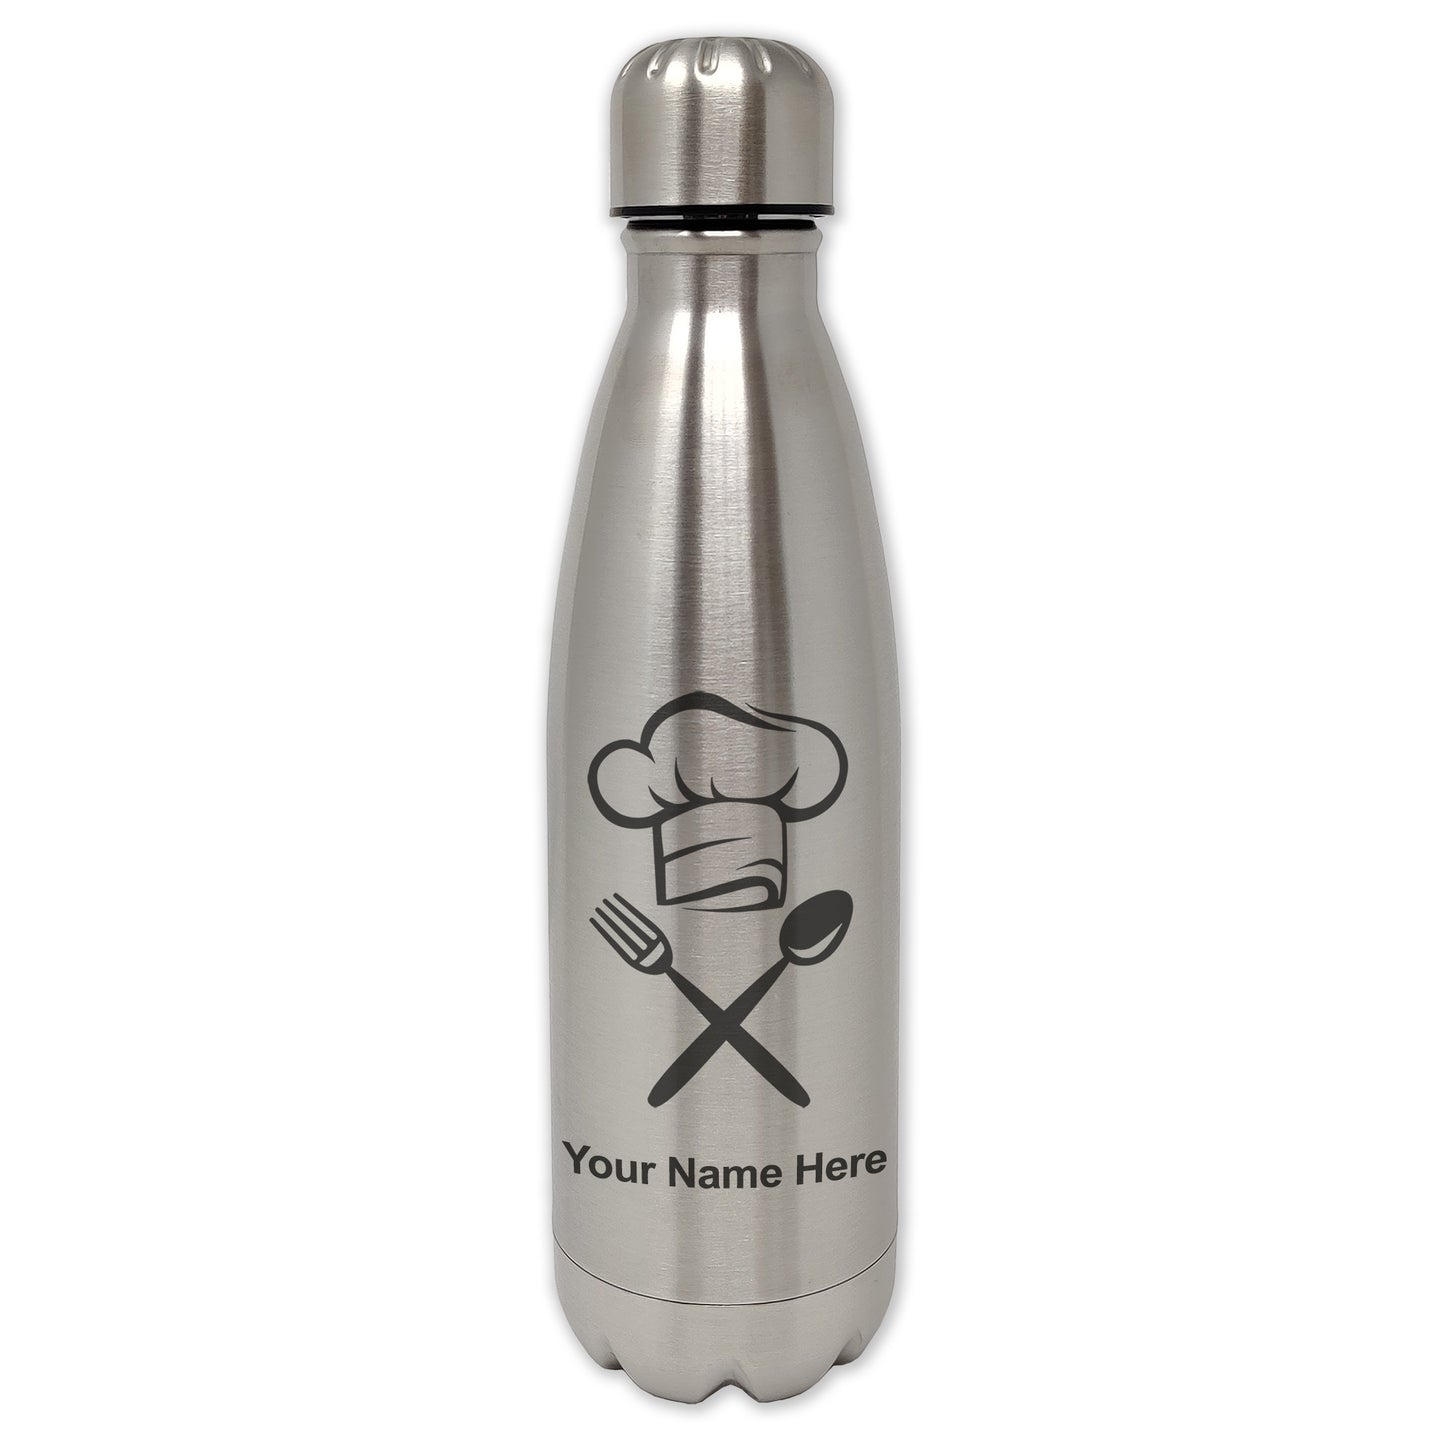 LaserGram Double Wall Water Bottle, Chef Hat, Personalized Engraving Included